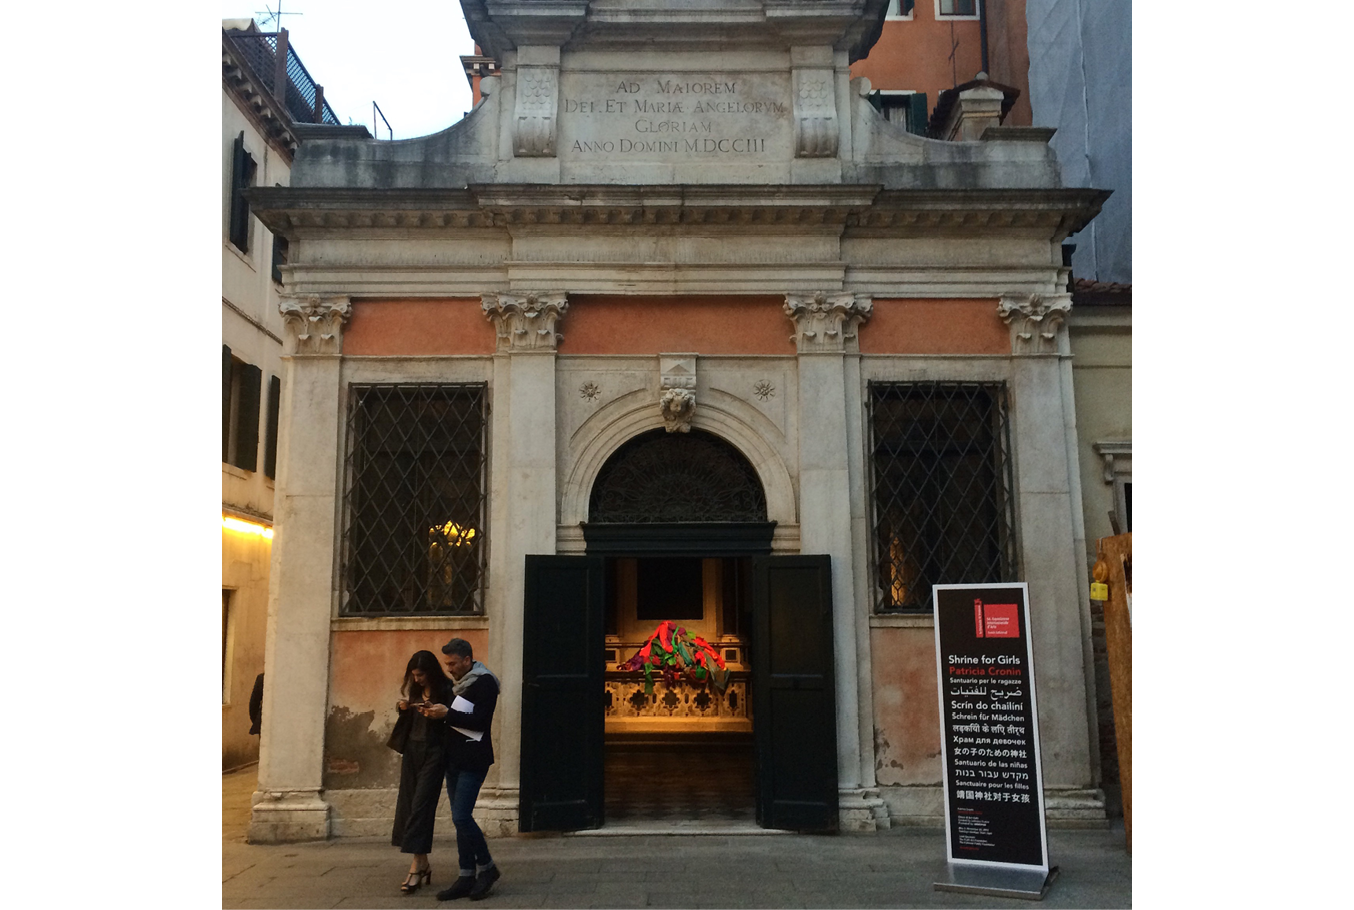 The exterior view of a small orange stucco church with white marble trim in Venice, Italy. The center front green doors are open and the high altar inside is illuminated with some brightly colored objects on top of it. A young man and woman dressed in black are walking away. Signage outside the church for the Venice Biennale reads: 'Shrine For Girls' in English and 12 other languages.